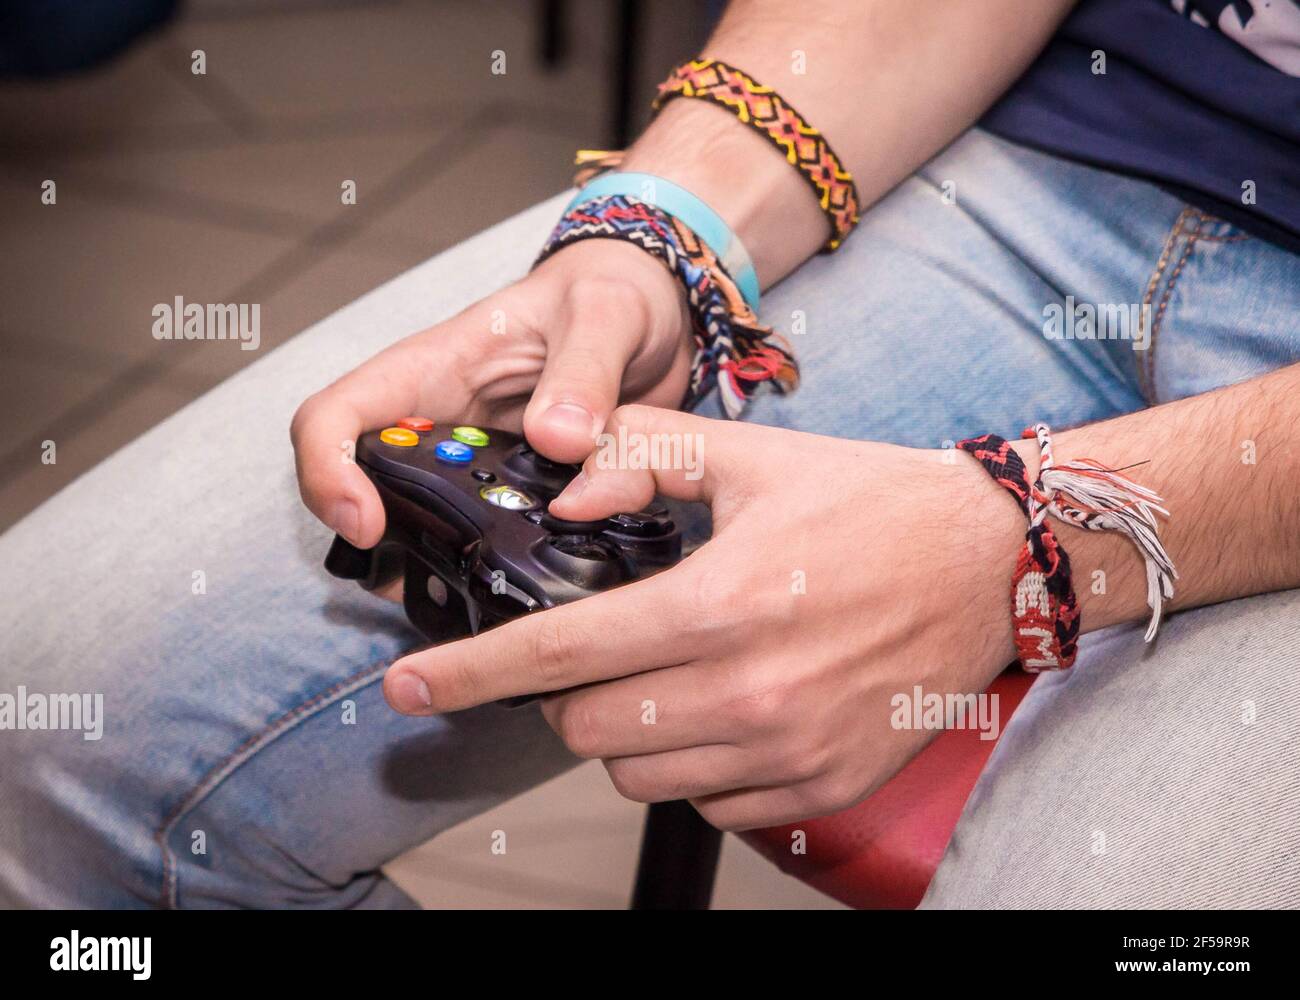 Belarus, Minsk region - September 22, 2017: The guy's hands are holding a joystick xbox and playing a console, close-up. Stock Photo